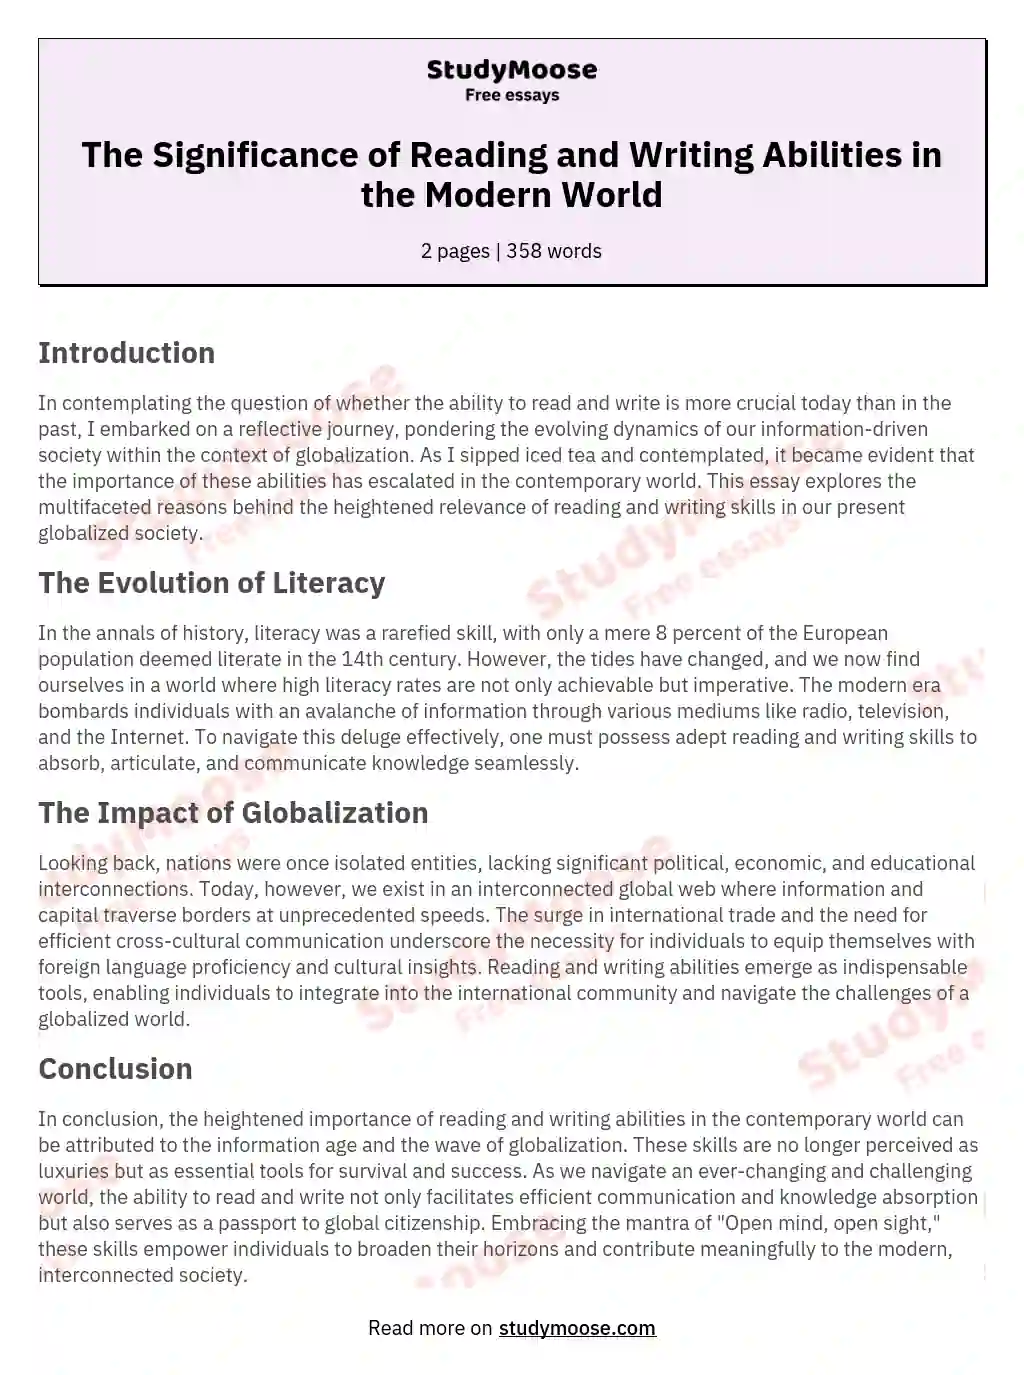 The Significance of Reading and Writing Abilities in the Modern World essay